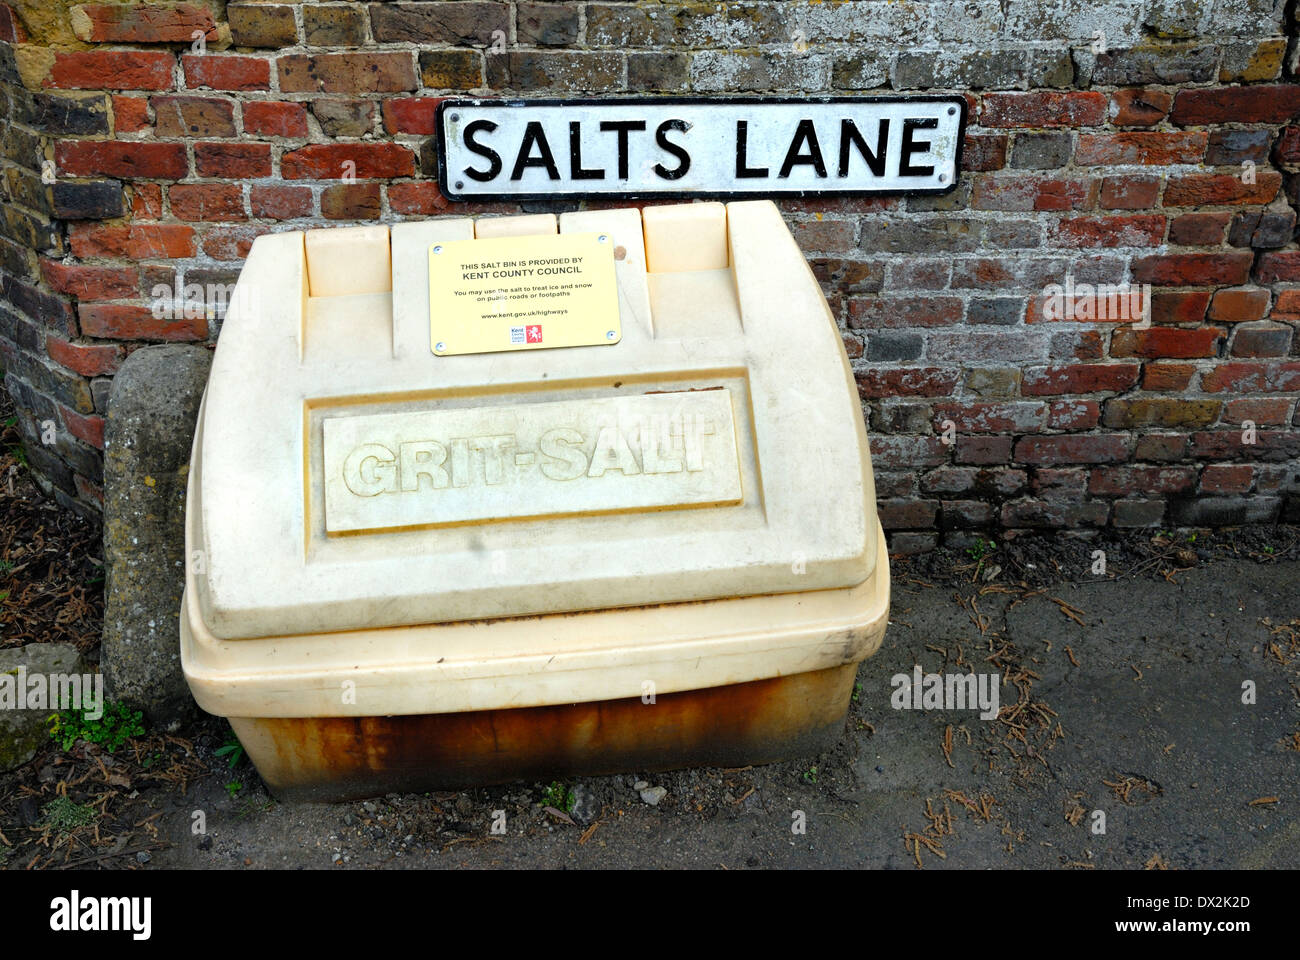 Loose Village, Kent, England. Grit and Salt bin (for use in ice and snow) in Salts Lane. Does what it says on the box. Stock Photo